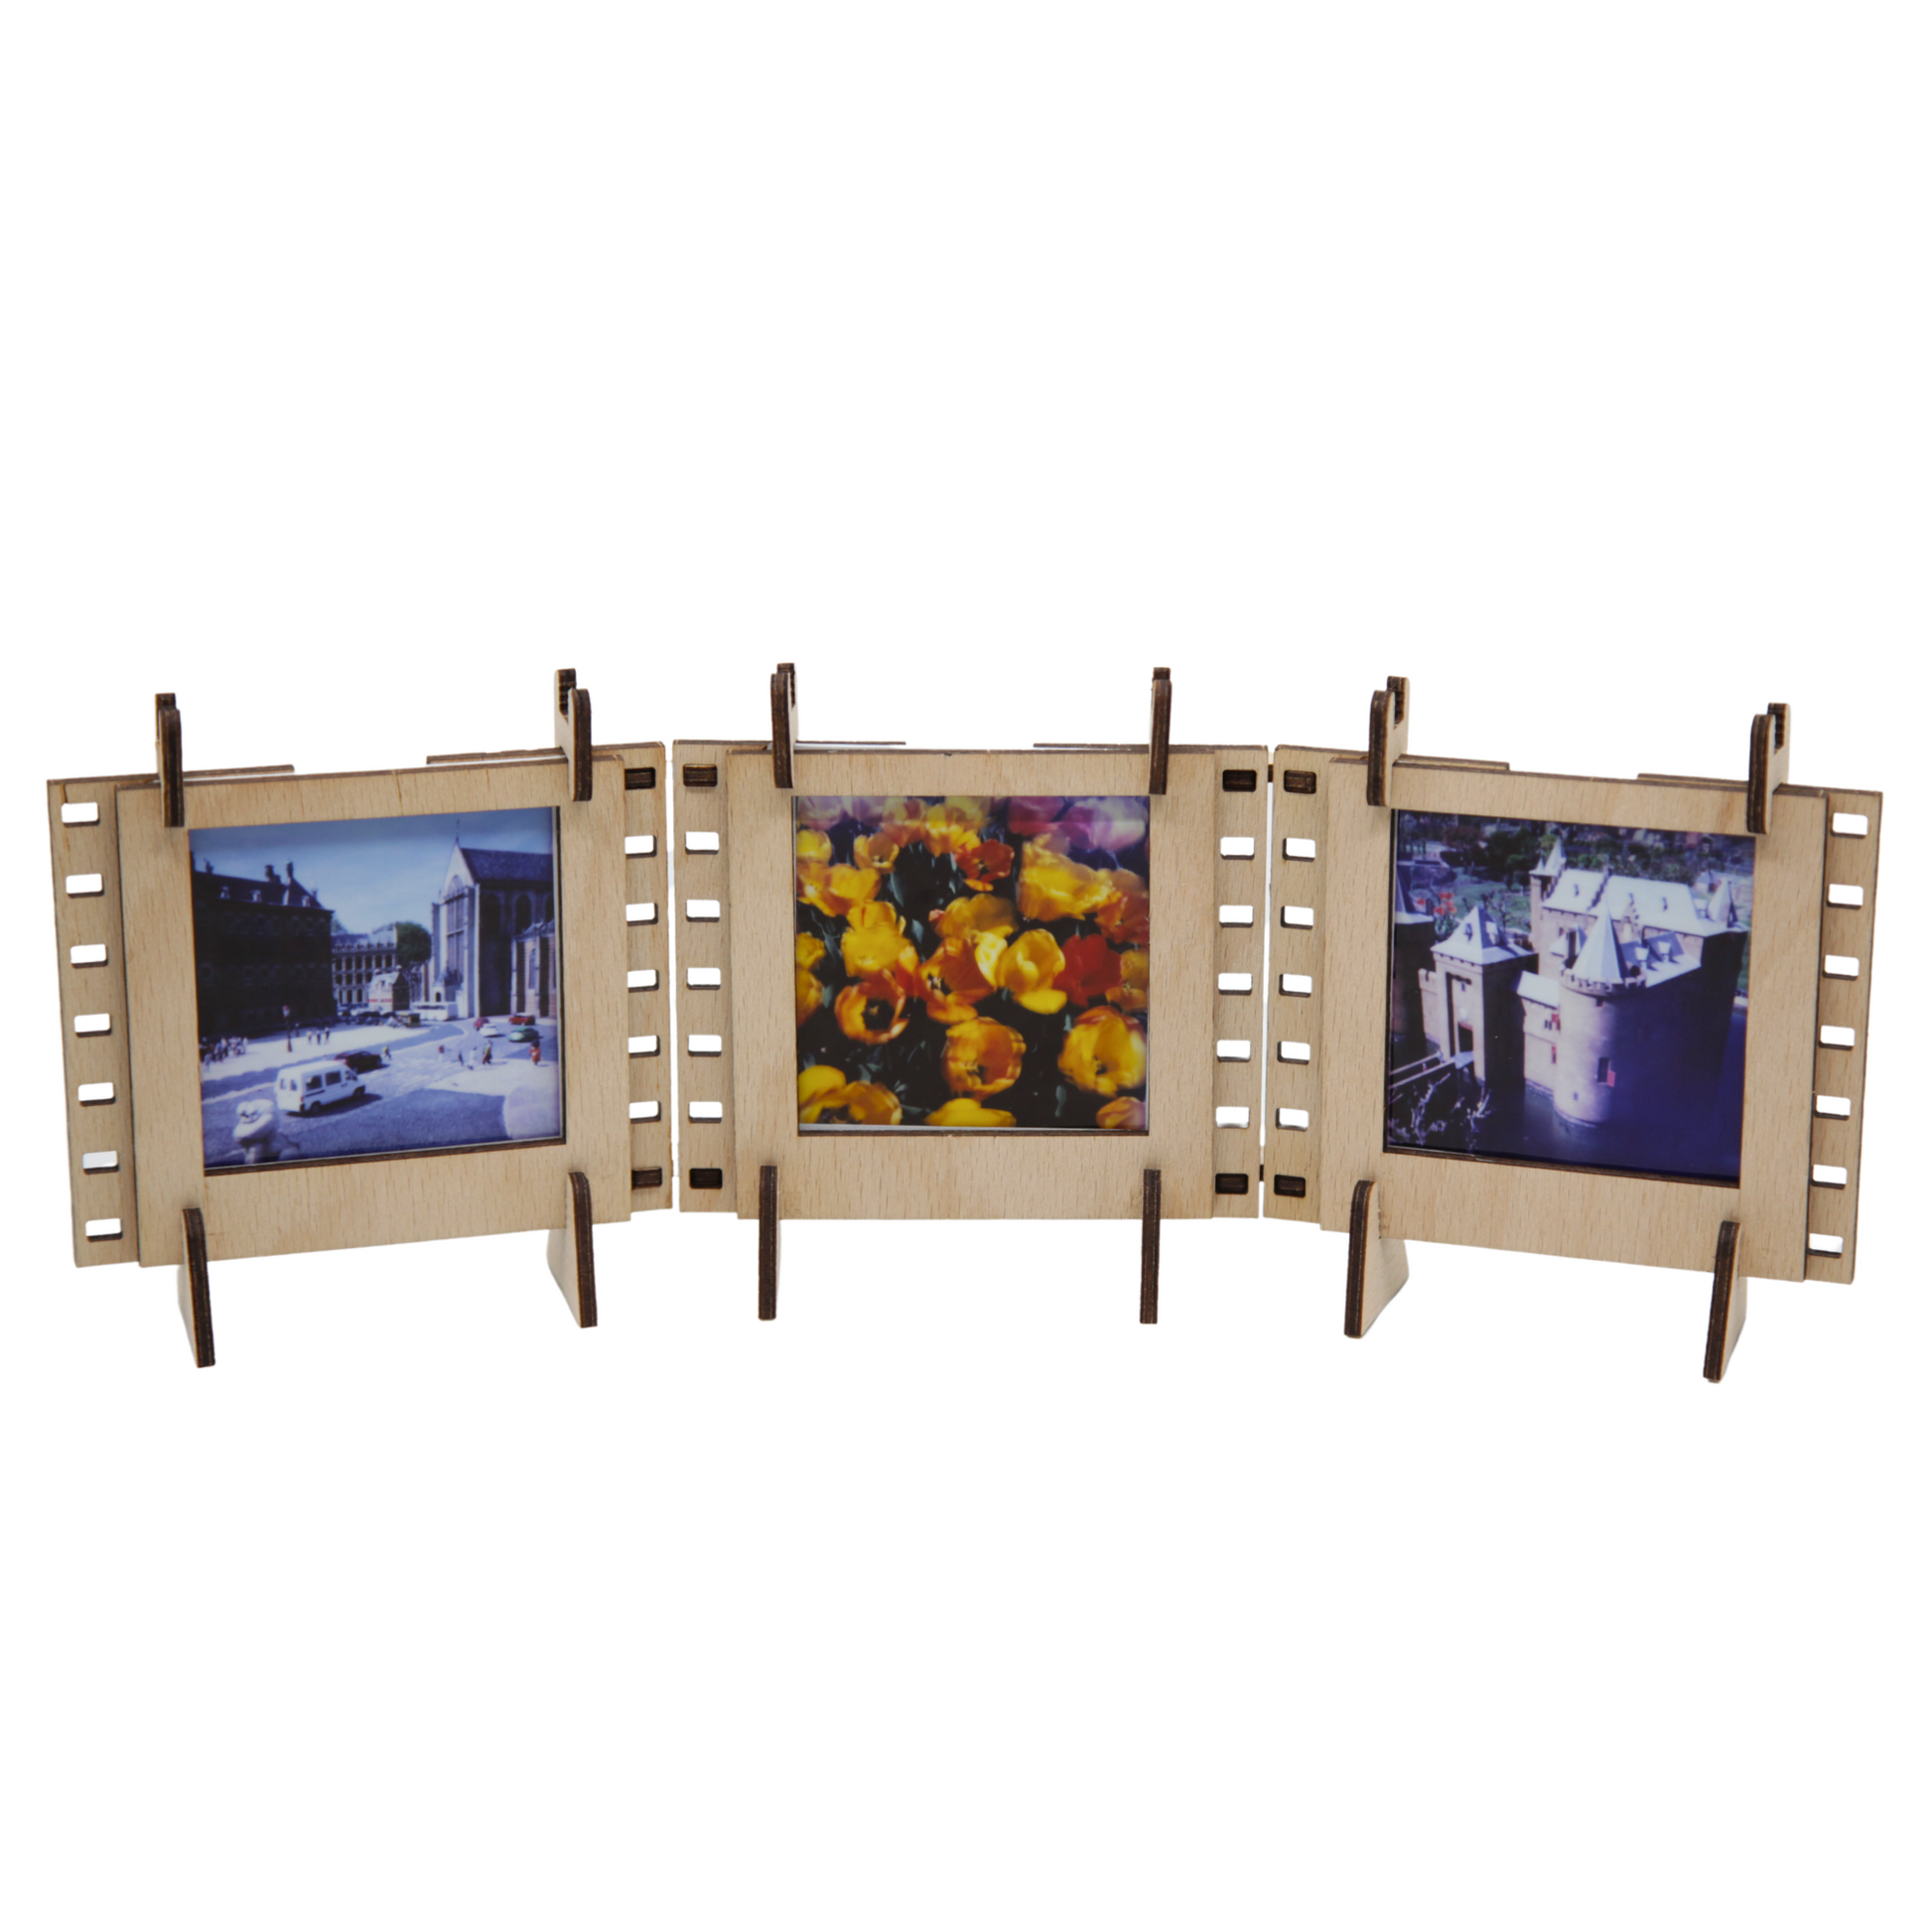  A set of three natural wood interconnectable Instax SQUARE film photo frames for instant SQUARE photos. 